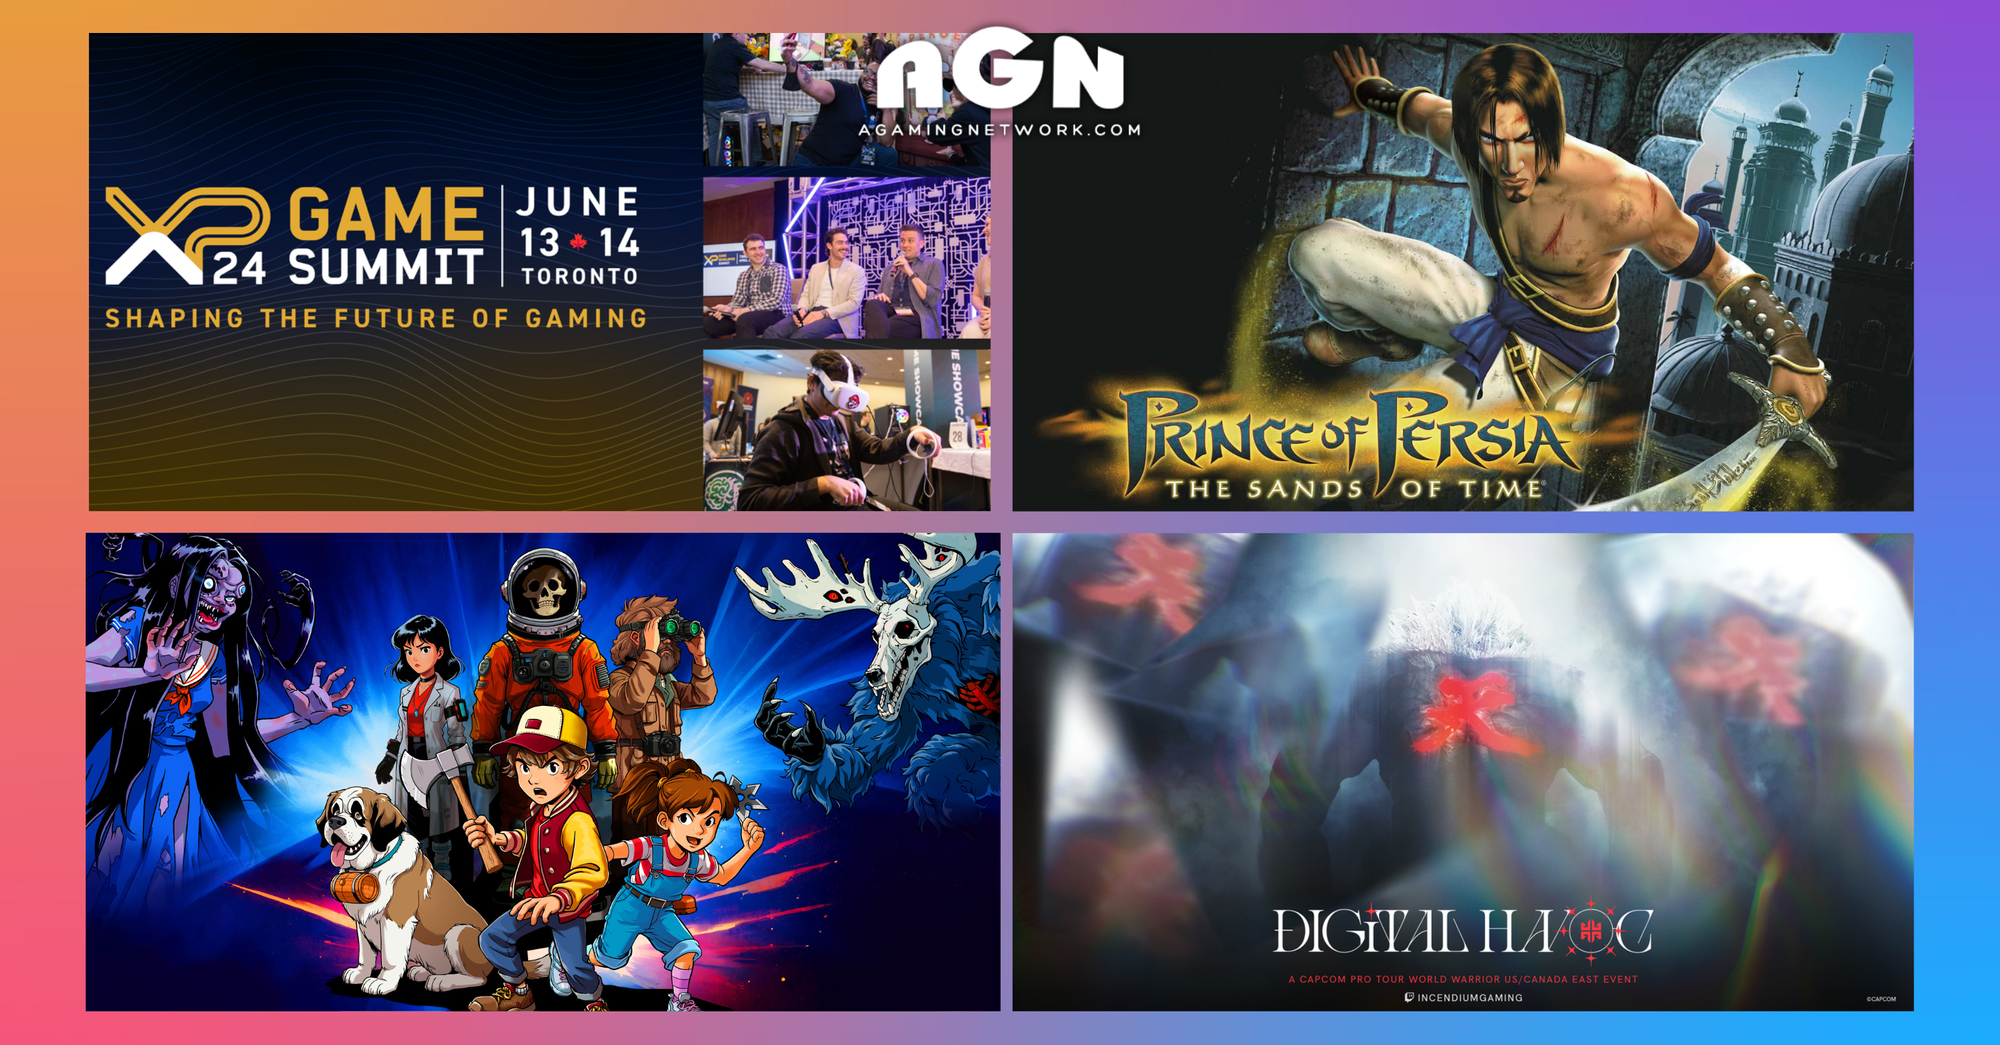 Prince of Persia: The Sands of Time Remake, Echo Generation: Midnight Edition for Steam/Switch, Incendium for Capcom Pro Tour World Warrior, and TONS of summer gaming events!